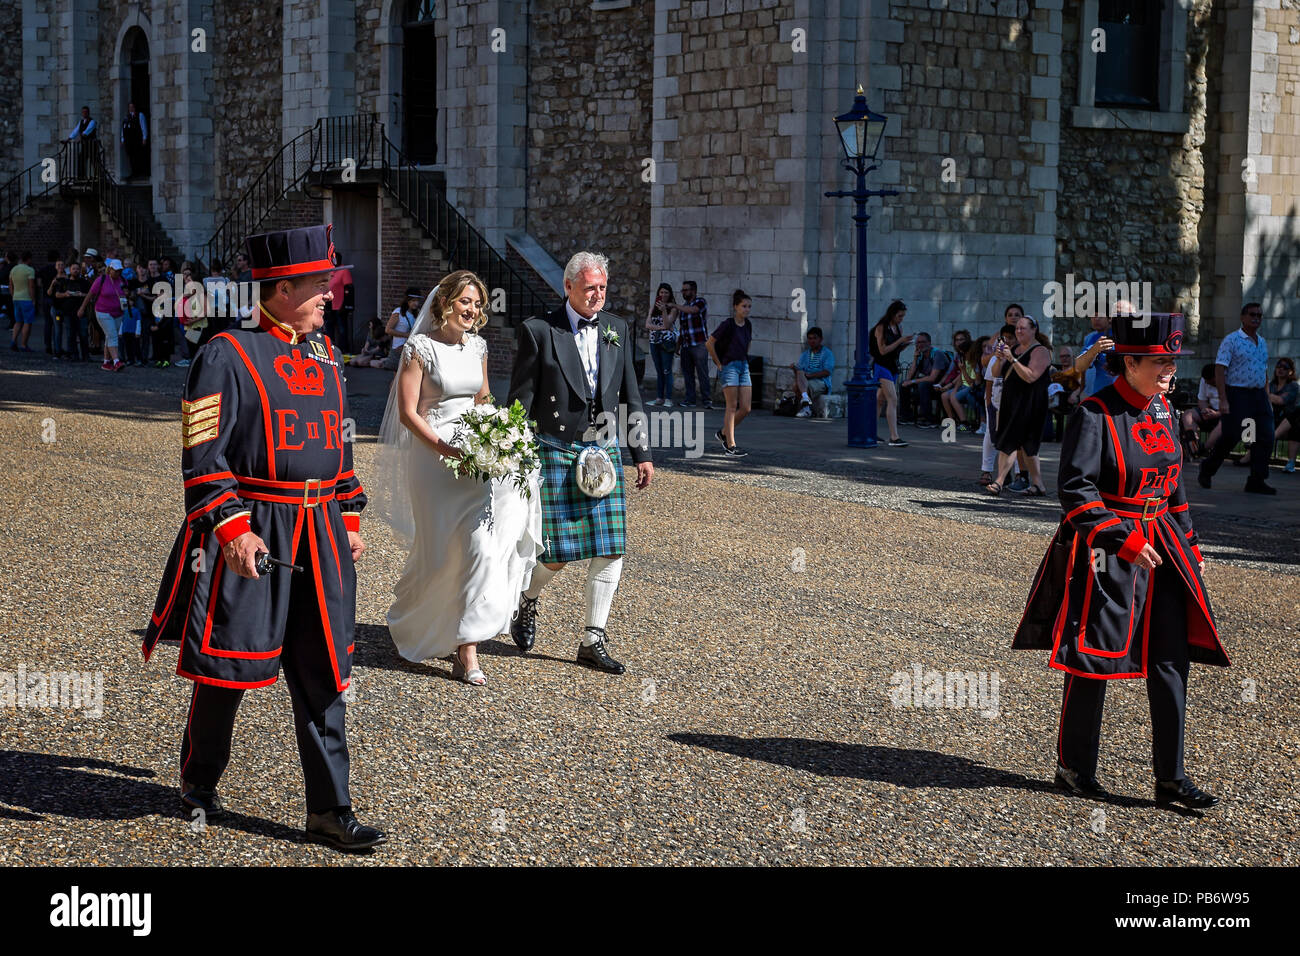 Bride & father of the bride escorted by beefeaters on way to wedding, taken in Tower of London, London, UK on 8 July 2017 Stock Photo